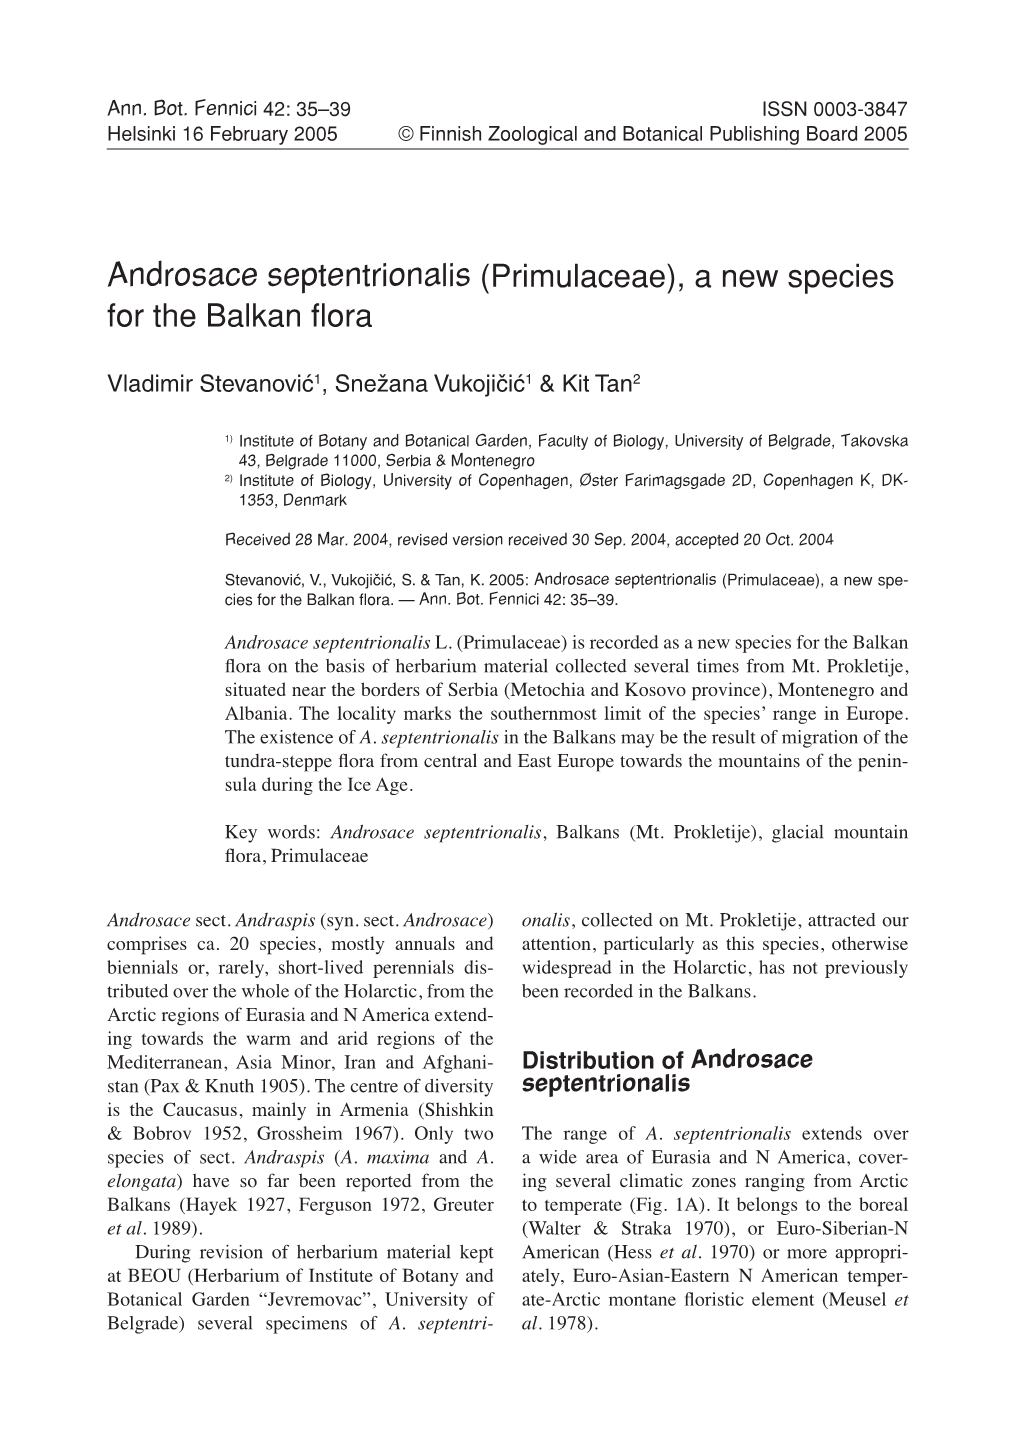 Androsace Septentrionalis (Primulaceae), a New Species for the Balkan ﬂora